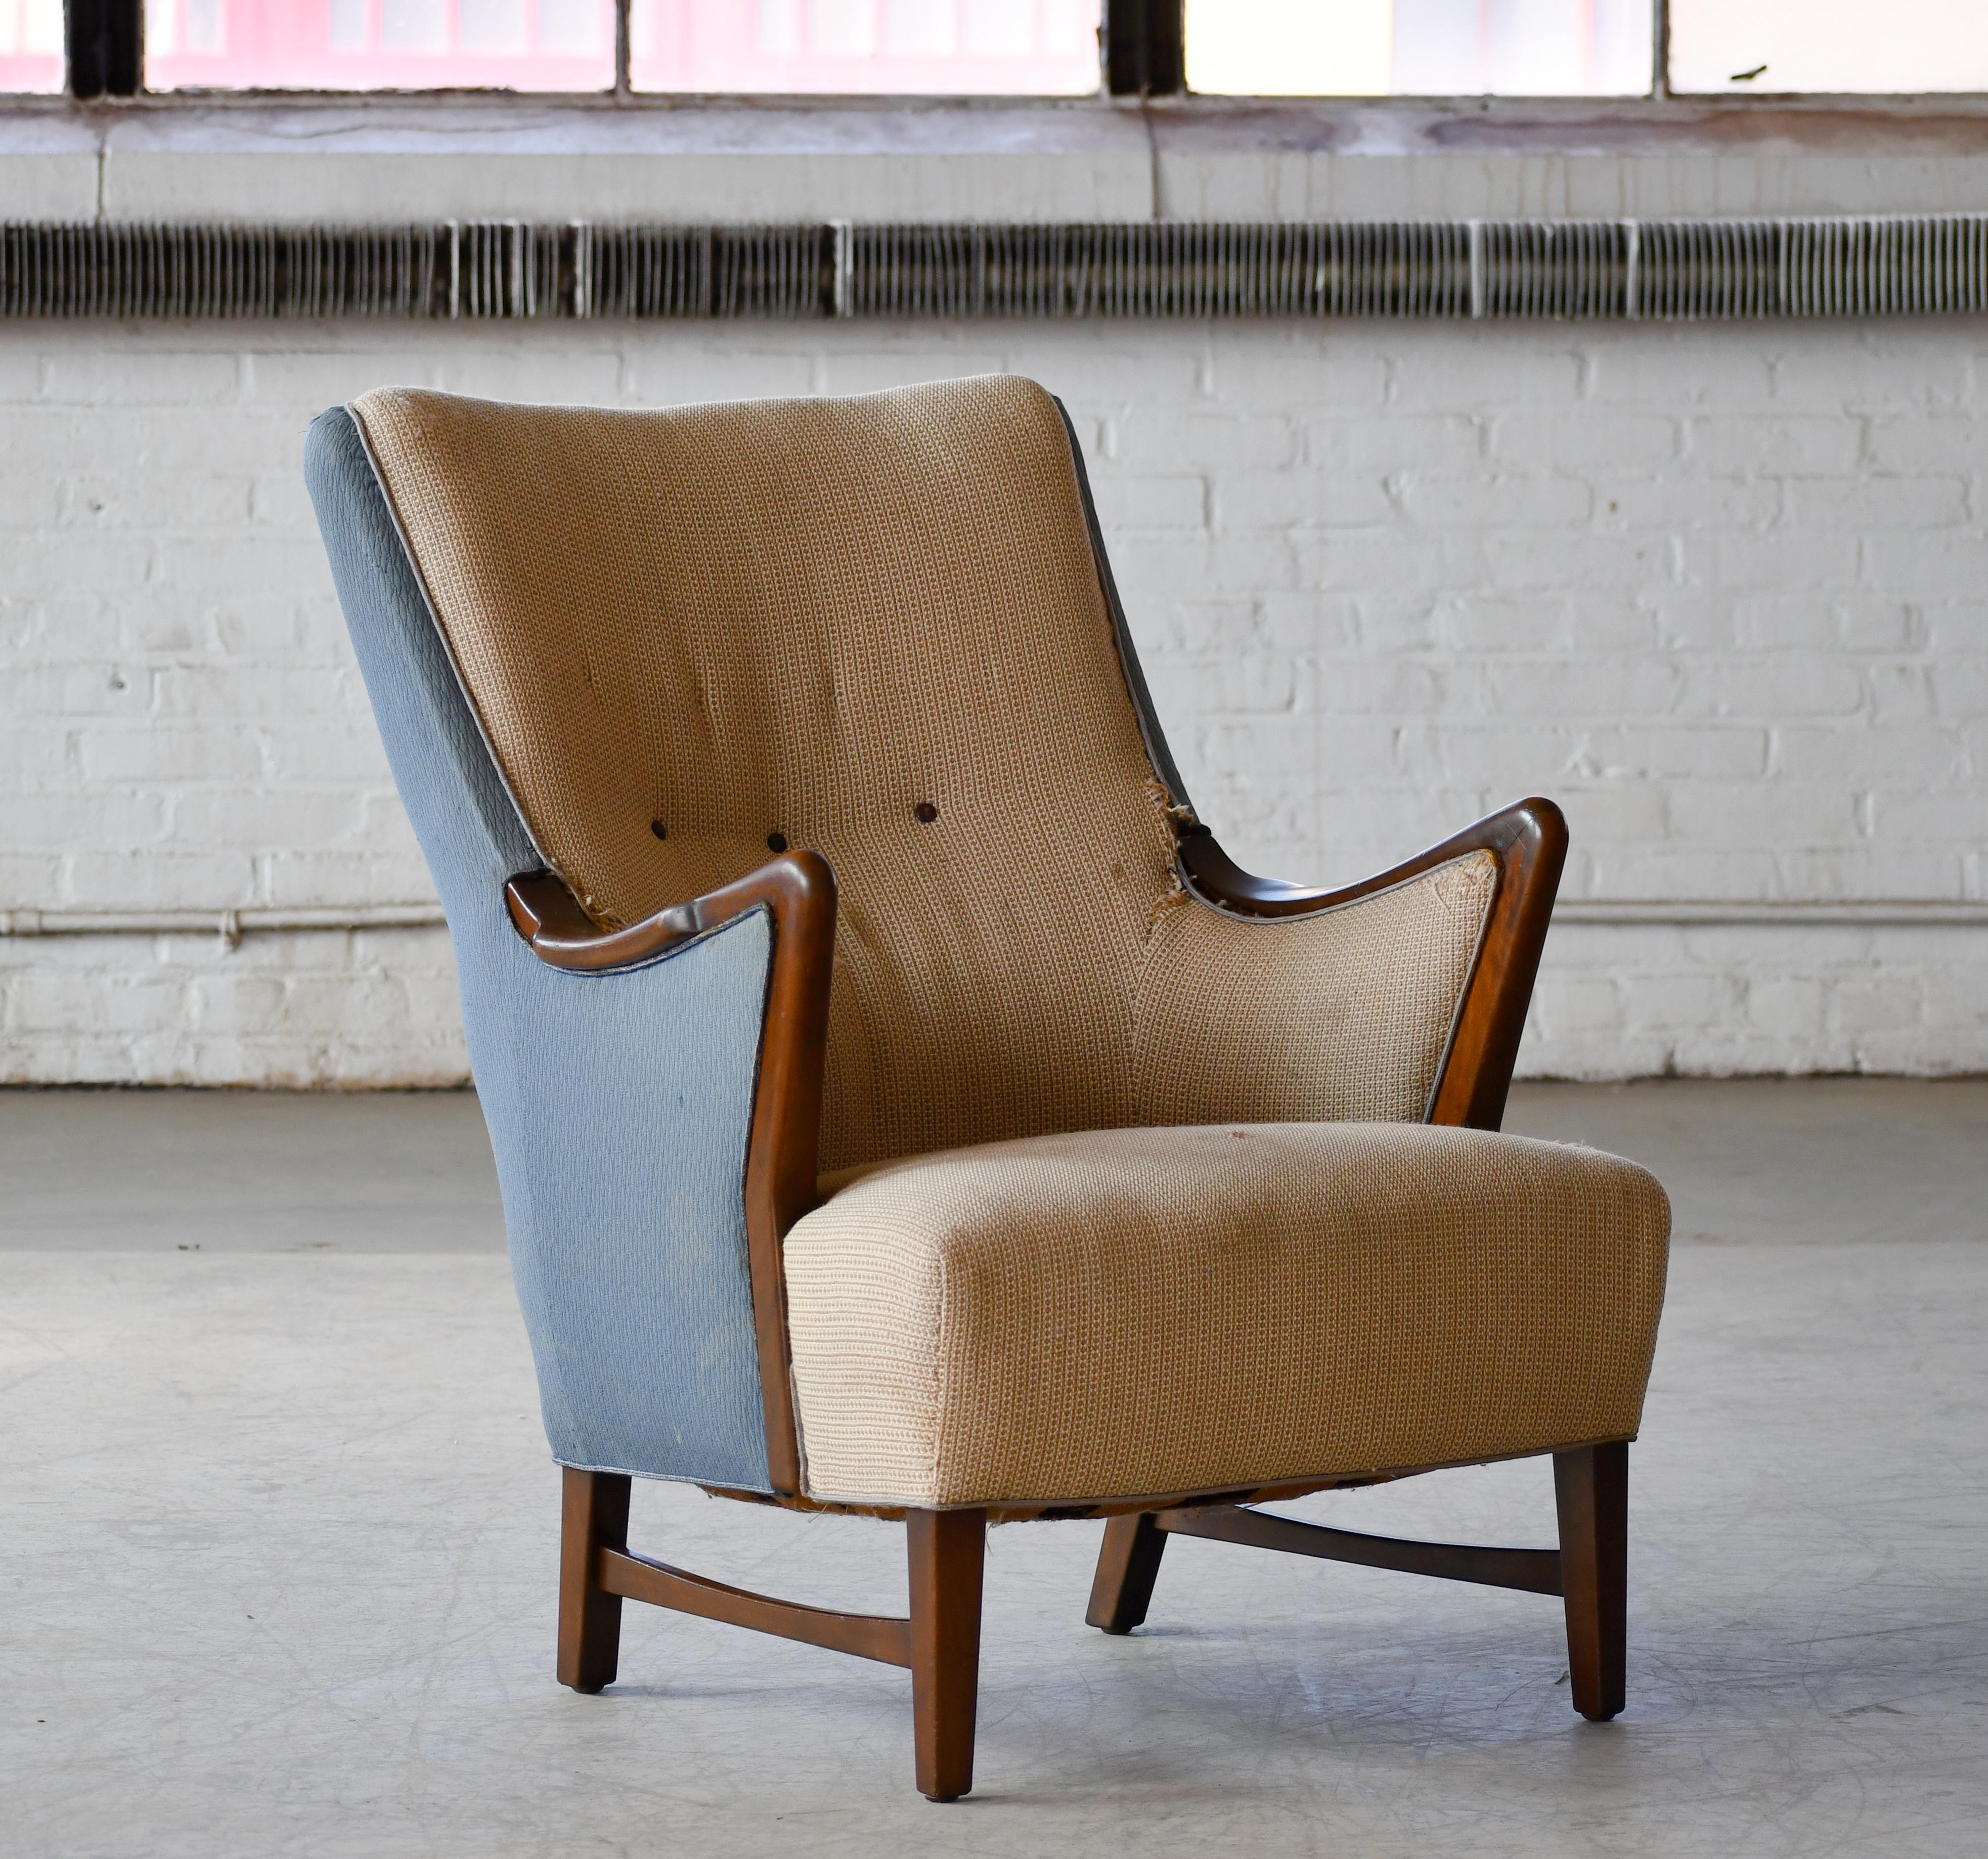 Mid-20th Century Danish Lounge Chair with Maple Armrests, 1940s